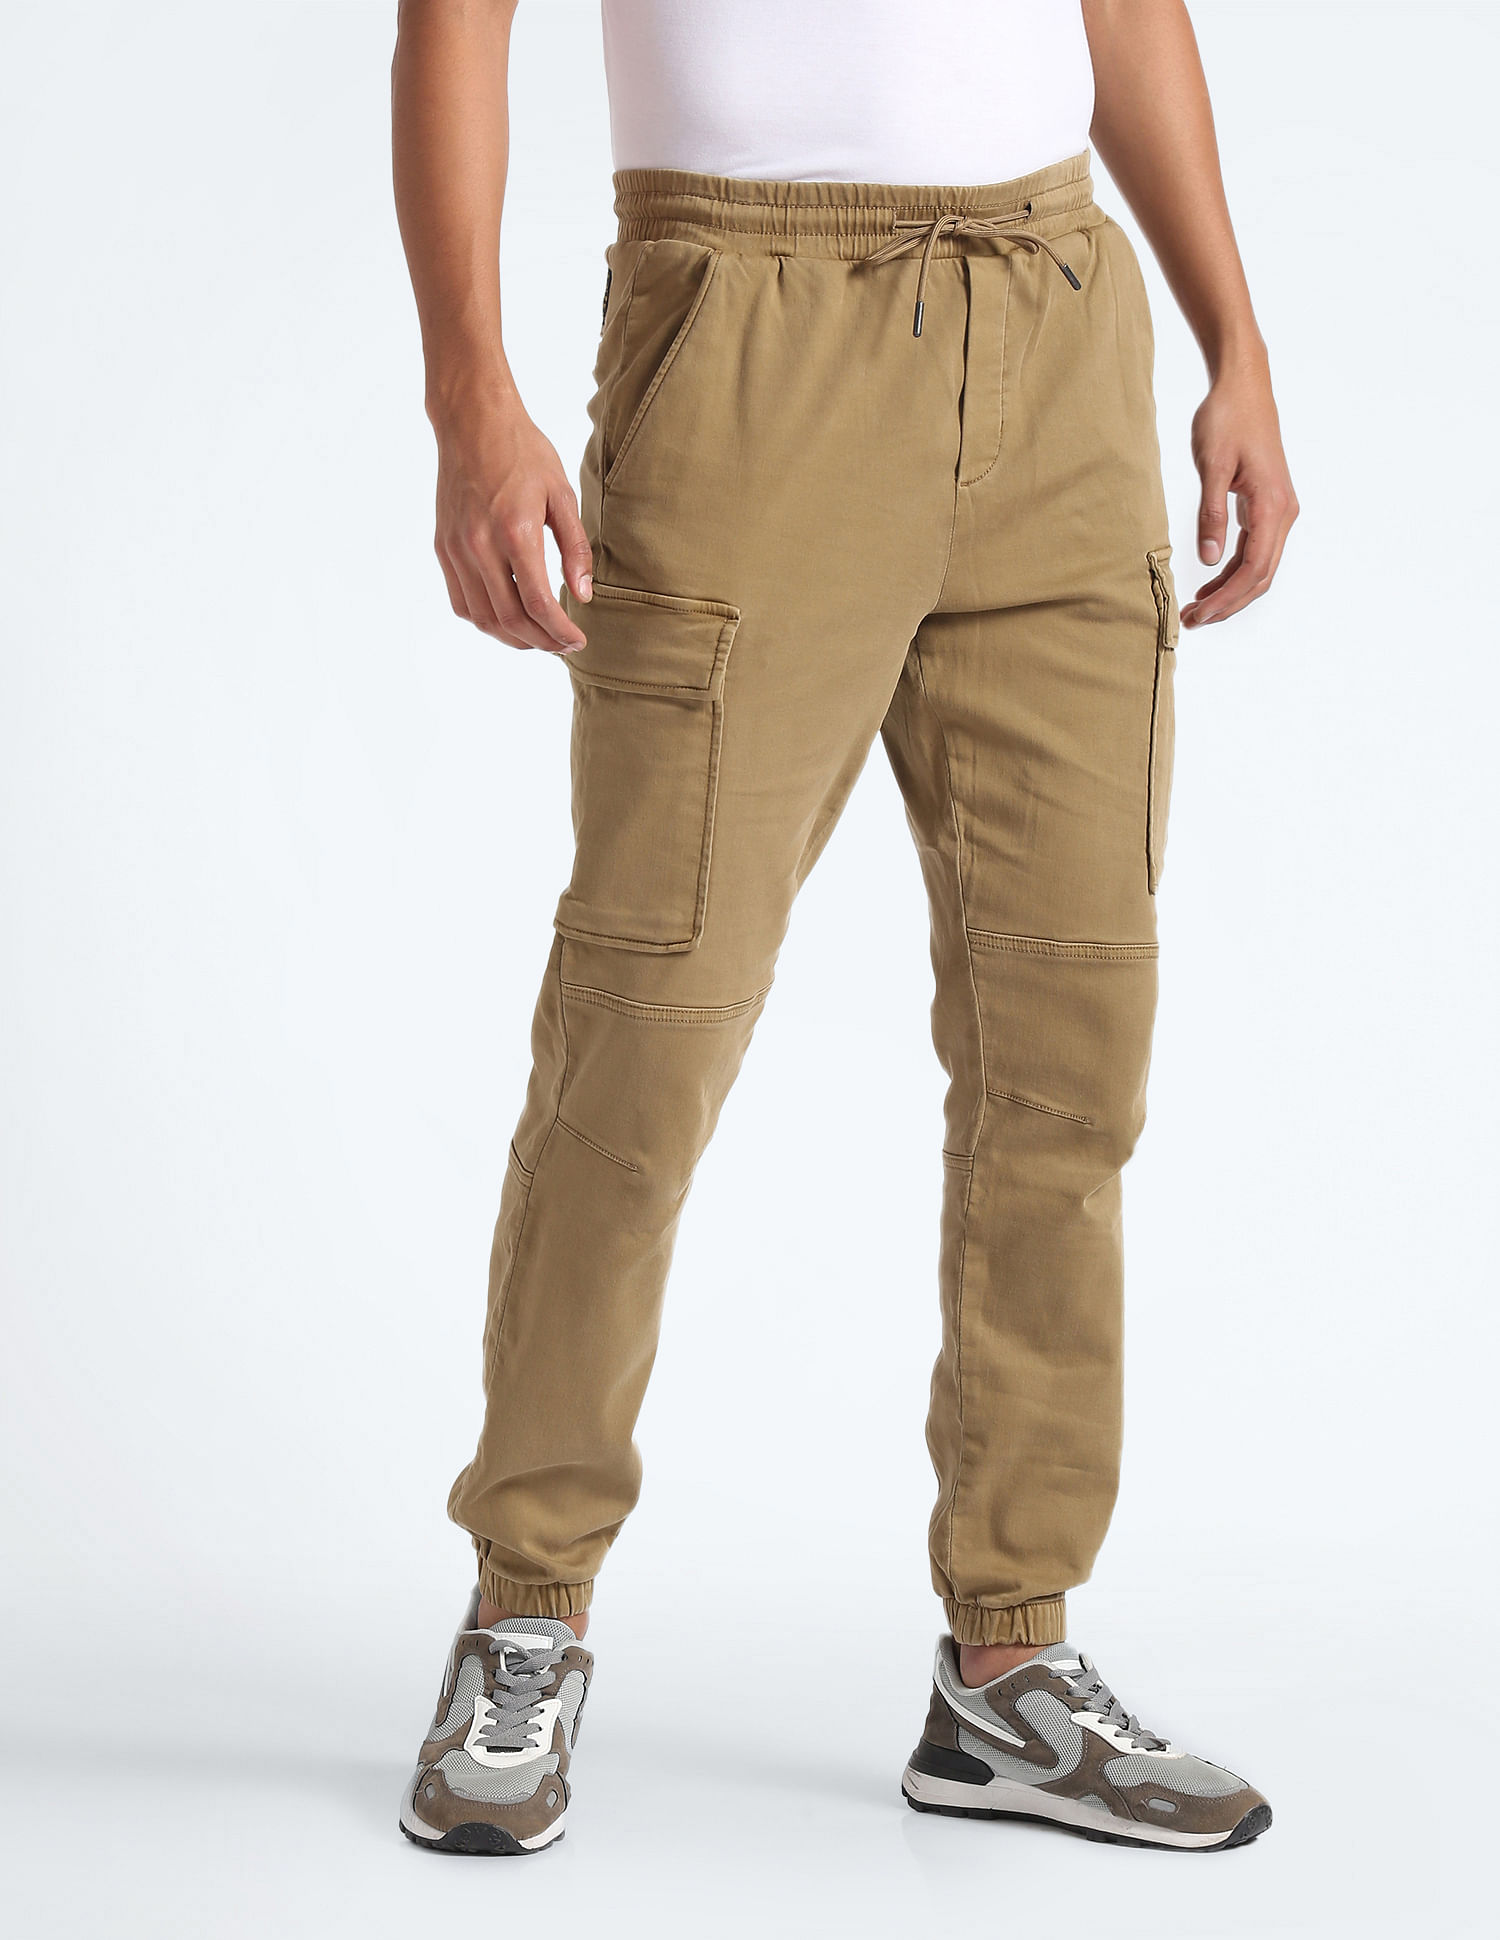 Shop Hollister Joggers for Men up to 40% Off